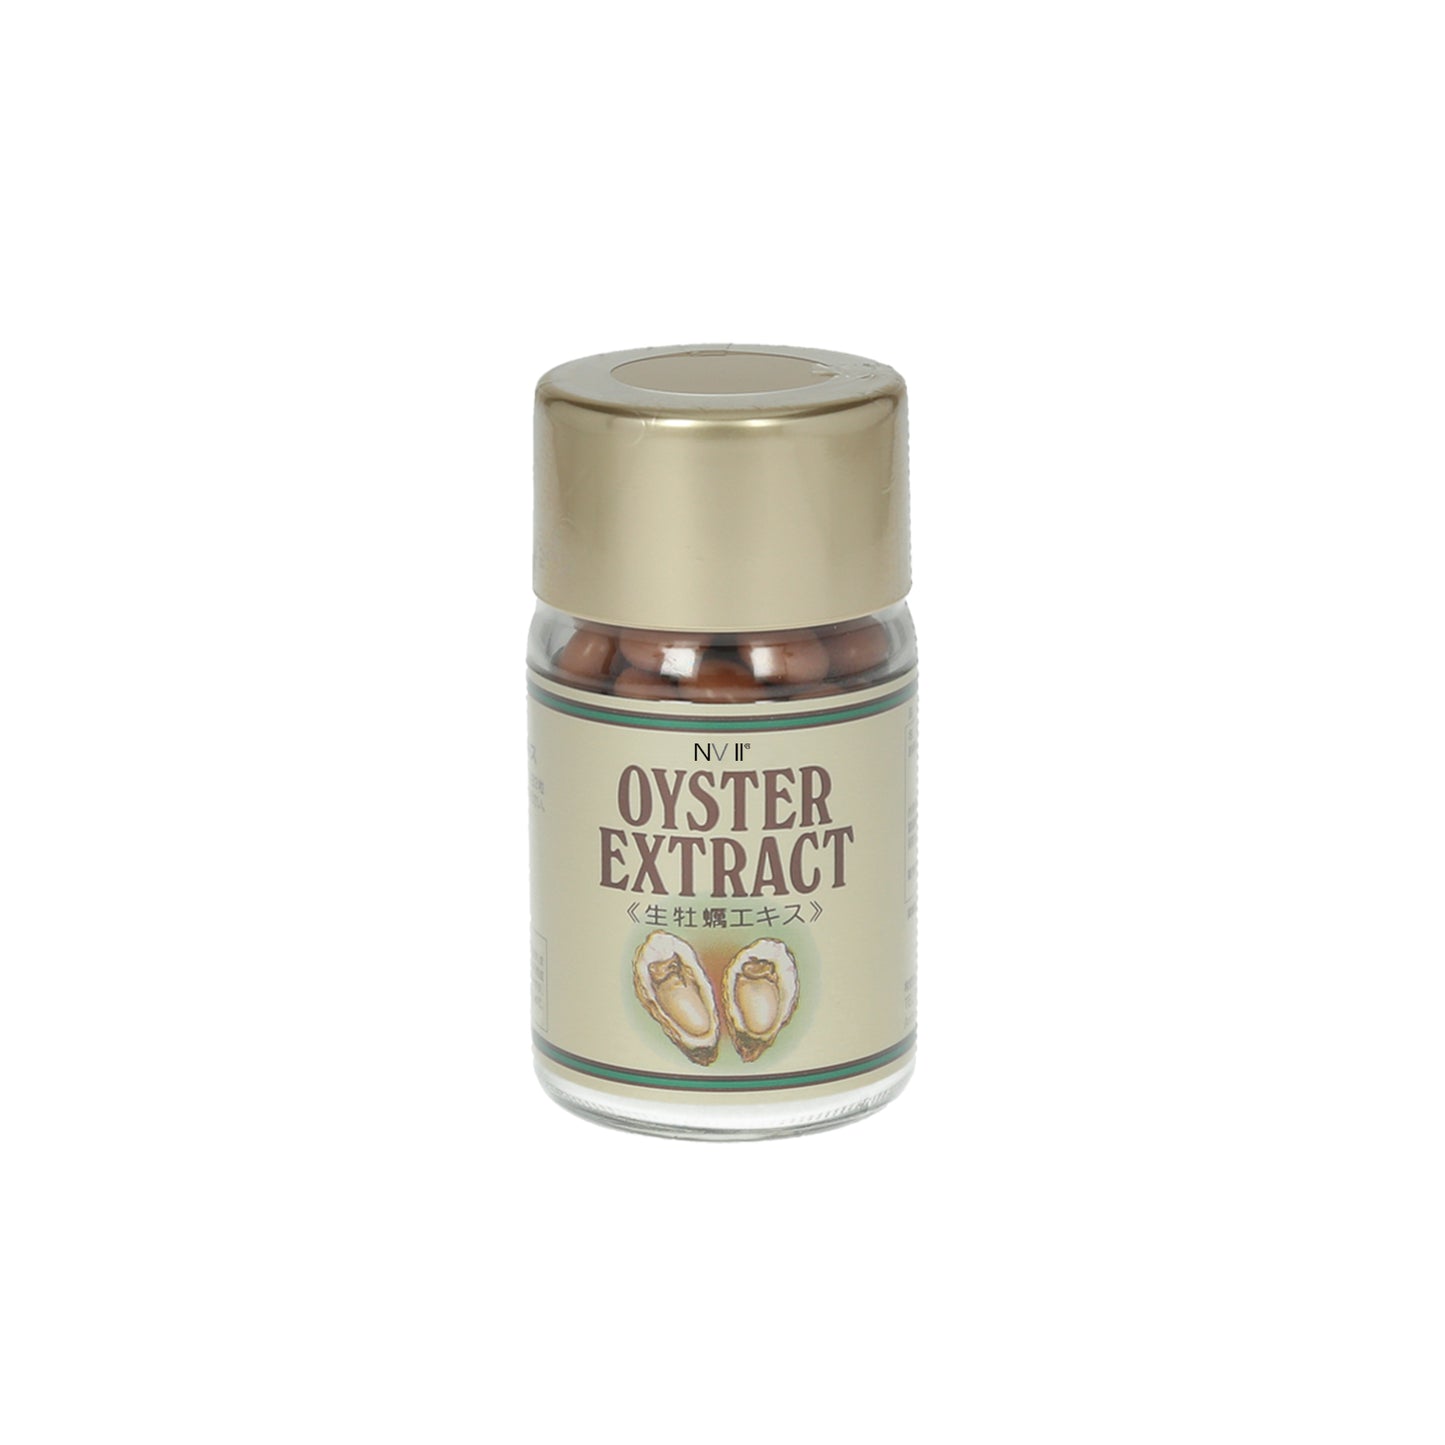 NV II Oyster Extract